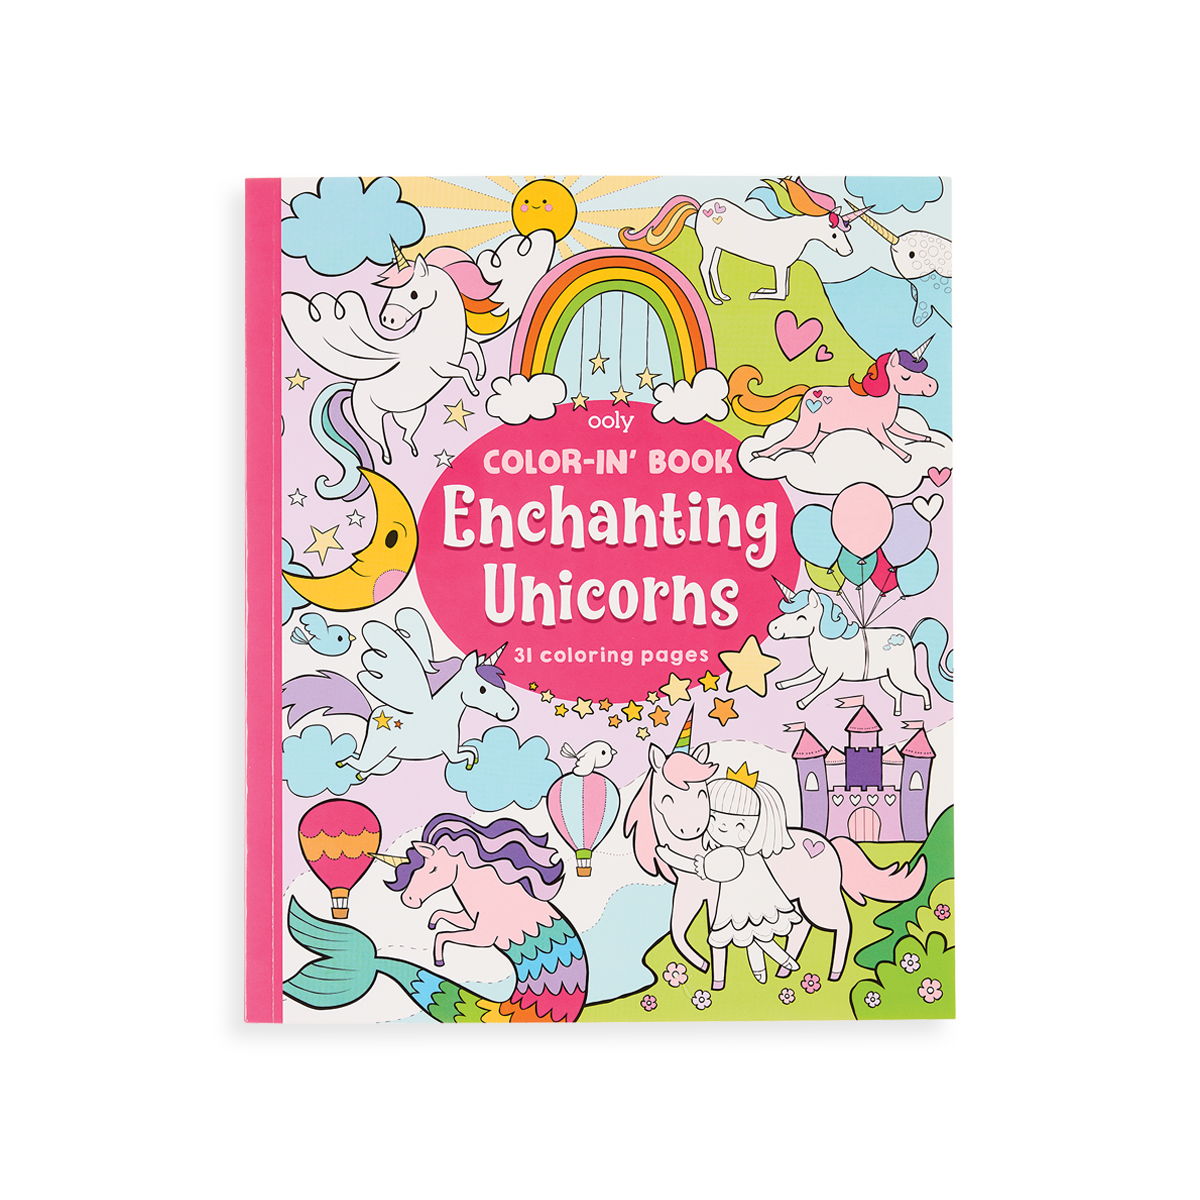 Sketch Book for Girls: Enchanting Cute Unicorn on Colorful Background!  Blank Sketchbook for Girls, Kids and Unicorn Lovers | Notebook for Drawing